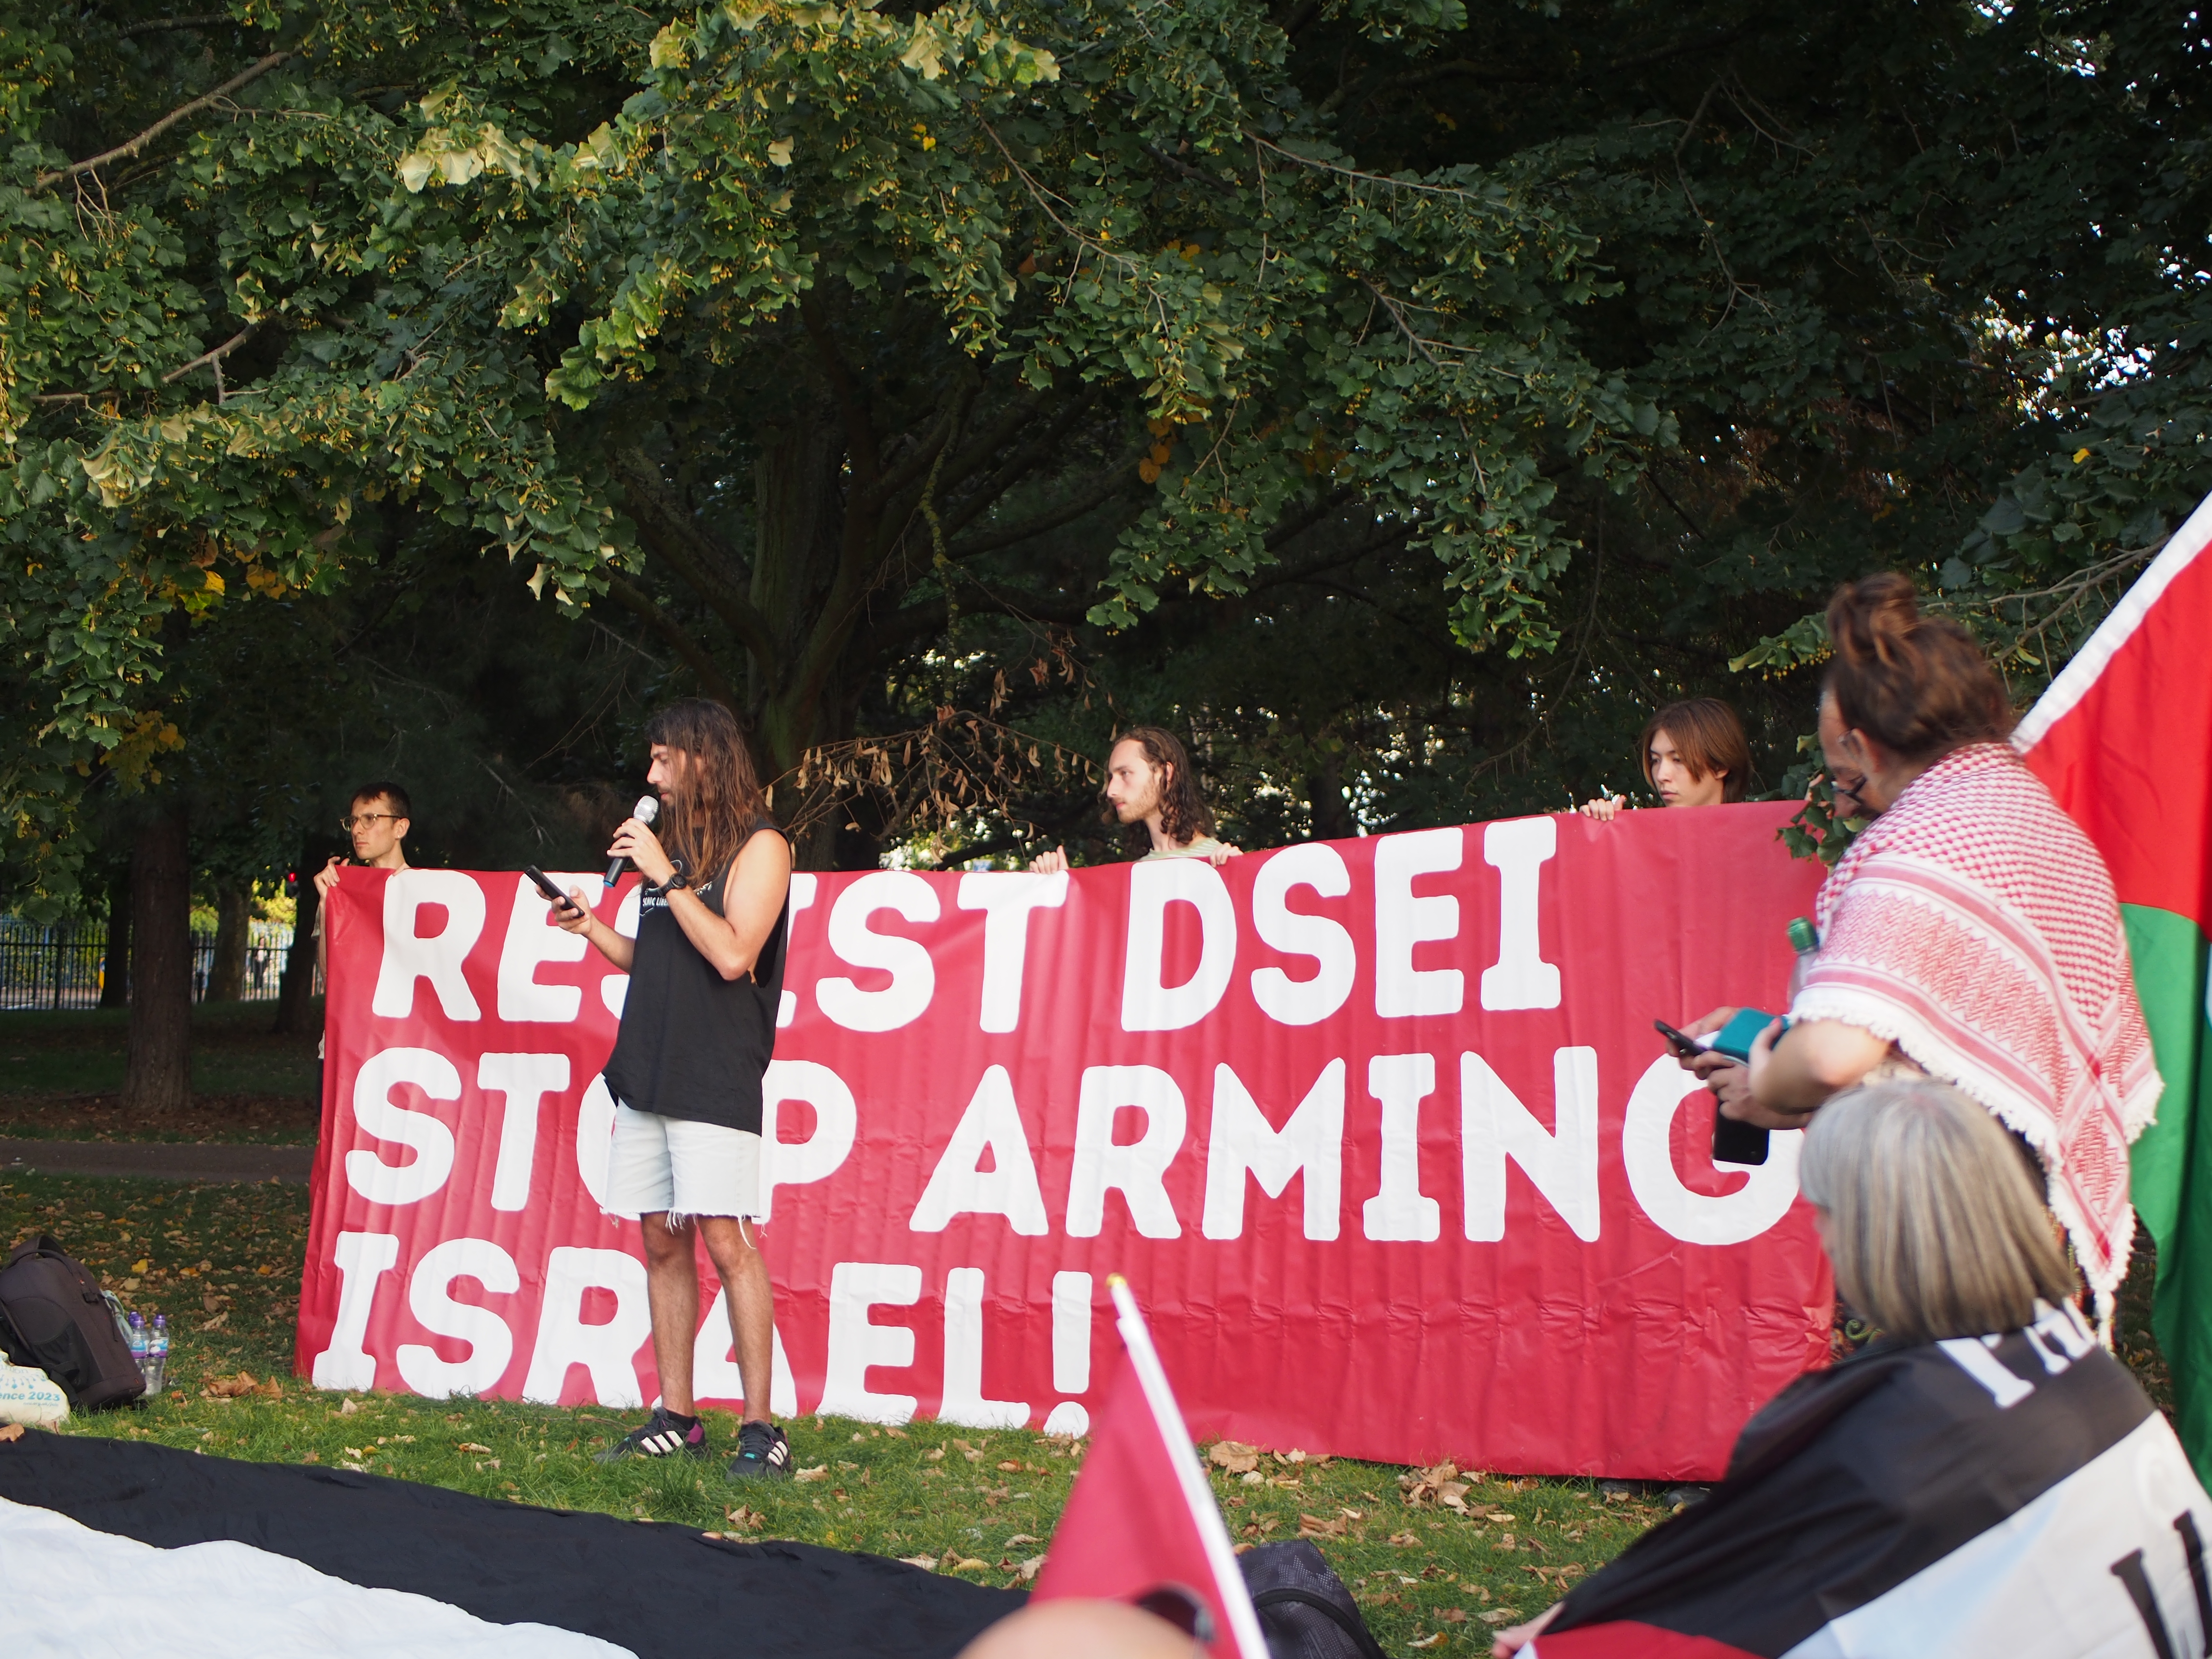 Protesters in front of a banner with the words "Resist DSEI, Stop Arming Israel"